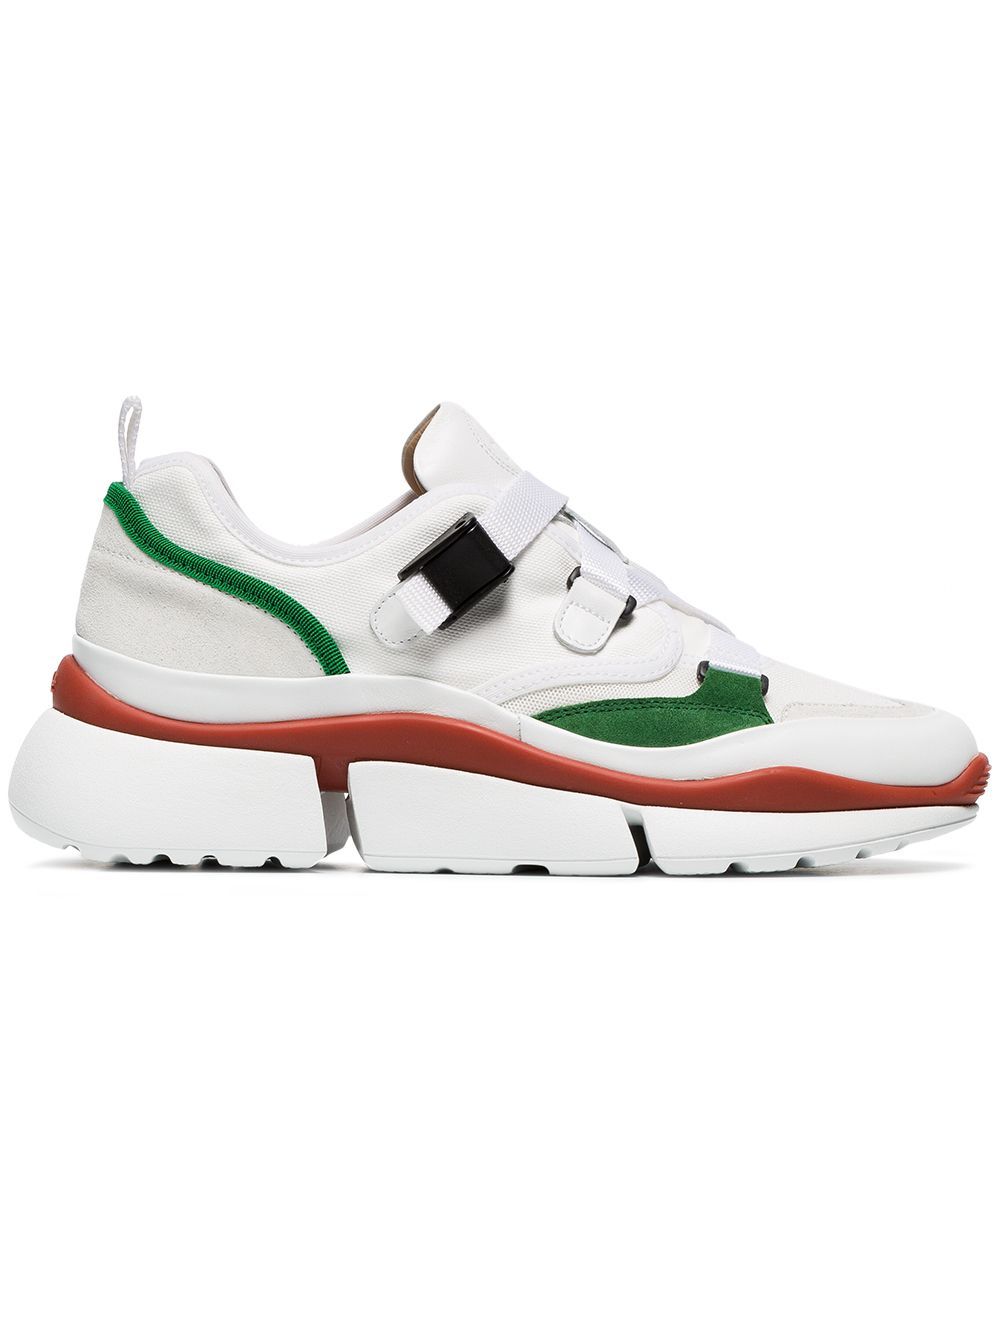 Chloé white and green Sonnie leather and suede multi strap sneakers | FarFetch Global